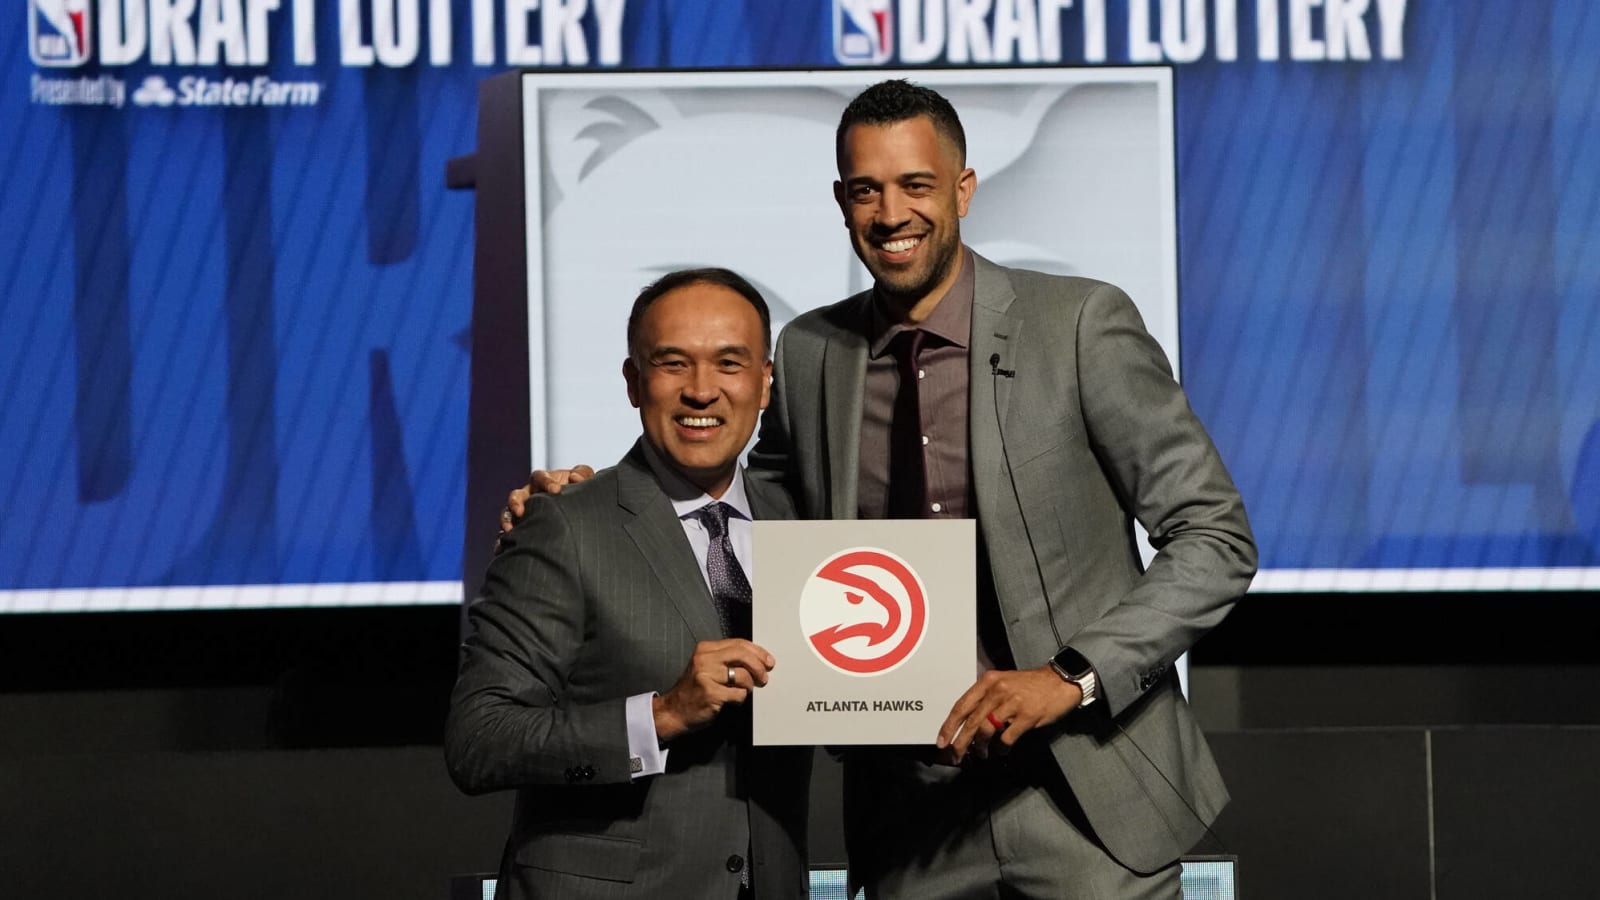 For the first time since 1975, the Atlanta Hawks have the #1 pick